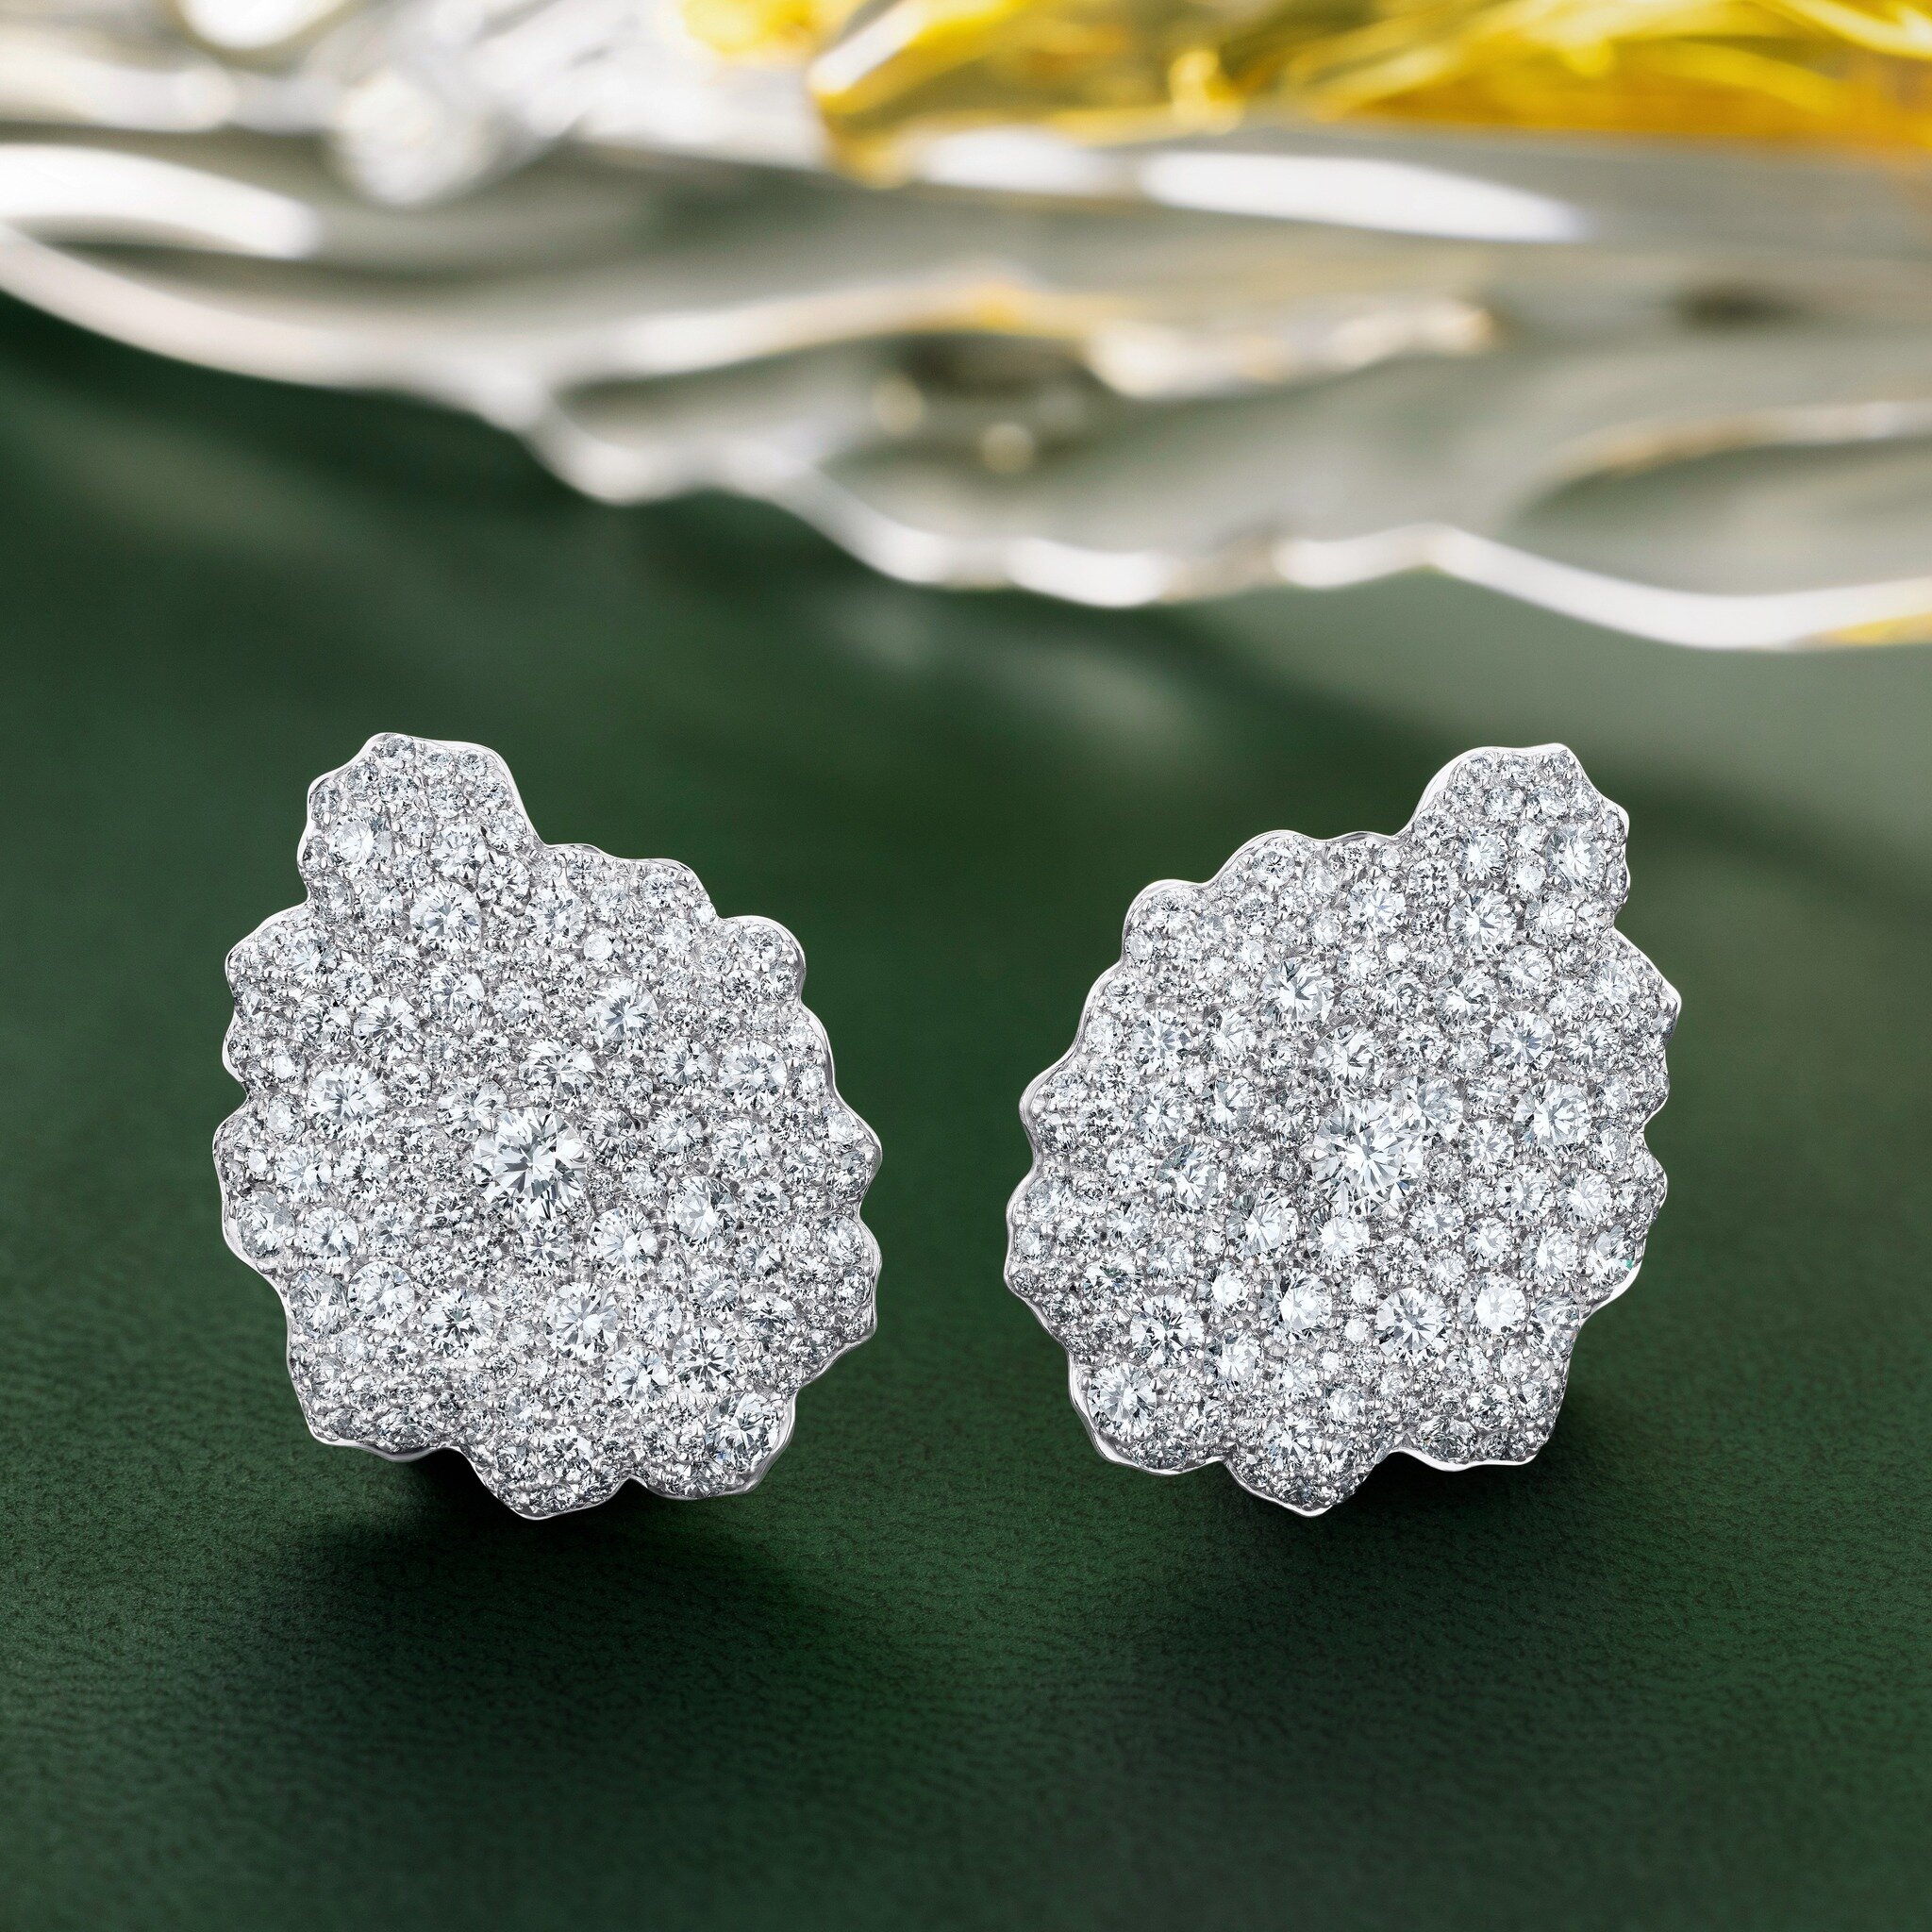 Mini Fleur de Sable earclips crafted in white, yellow gold and white natural diamonds - a sparkling beauty with an irresistible allure 🤍

Signed - VANLELES
Marked - Italian and British hallmarks 
Natural diamonds - 5.44 carats VVS and GVS+ centre di